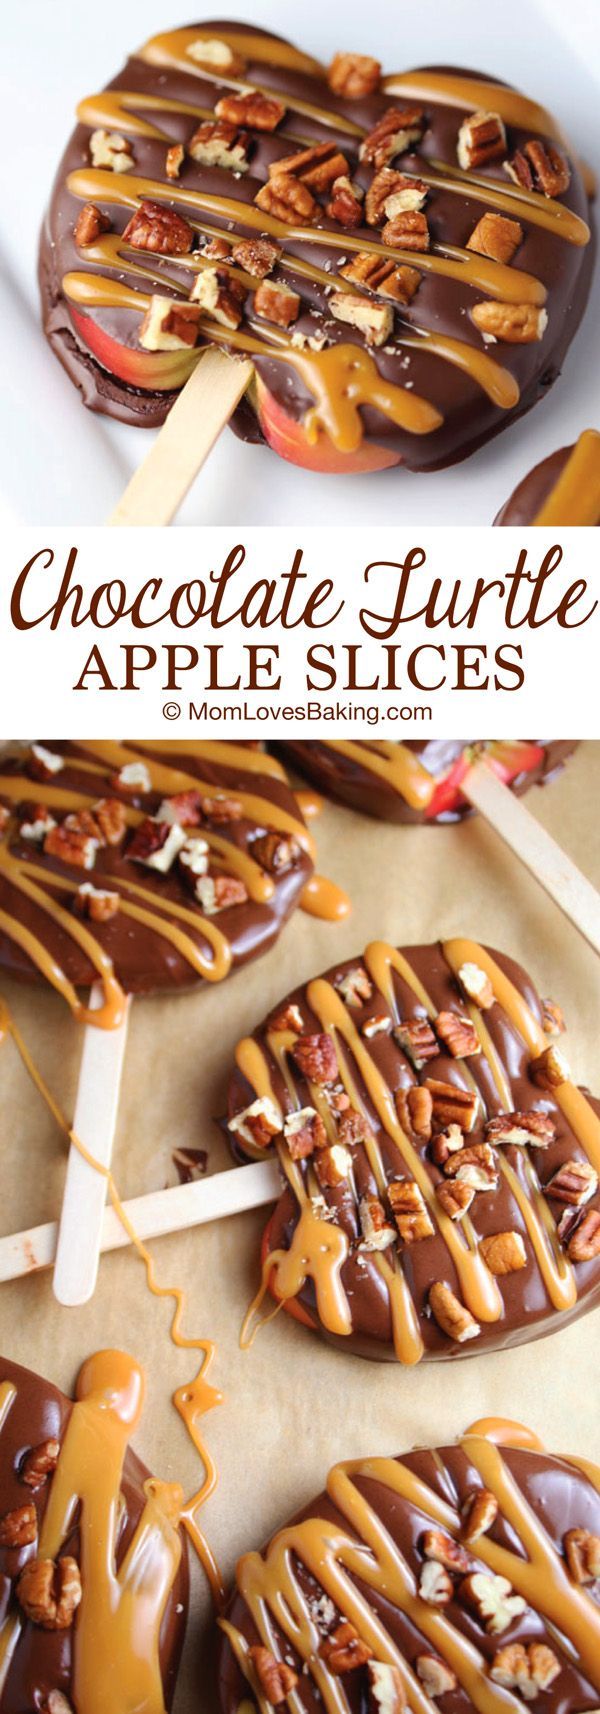 Chocolate Turtle Apple Slices are thick slices of Fuji apples covered in melted ch